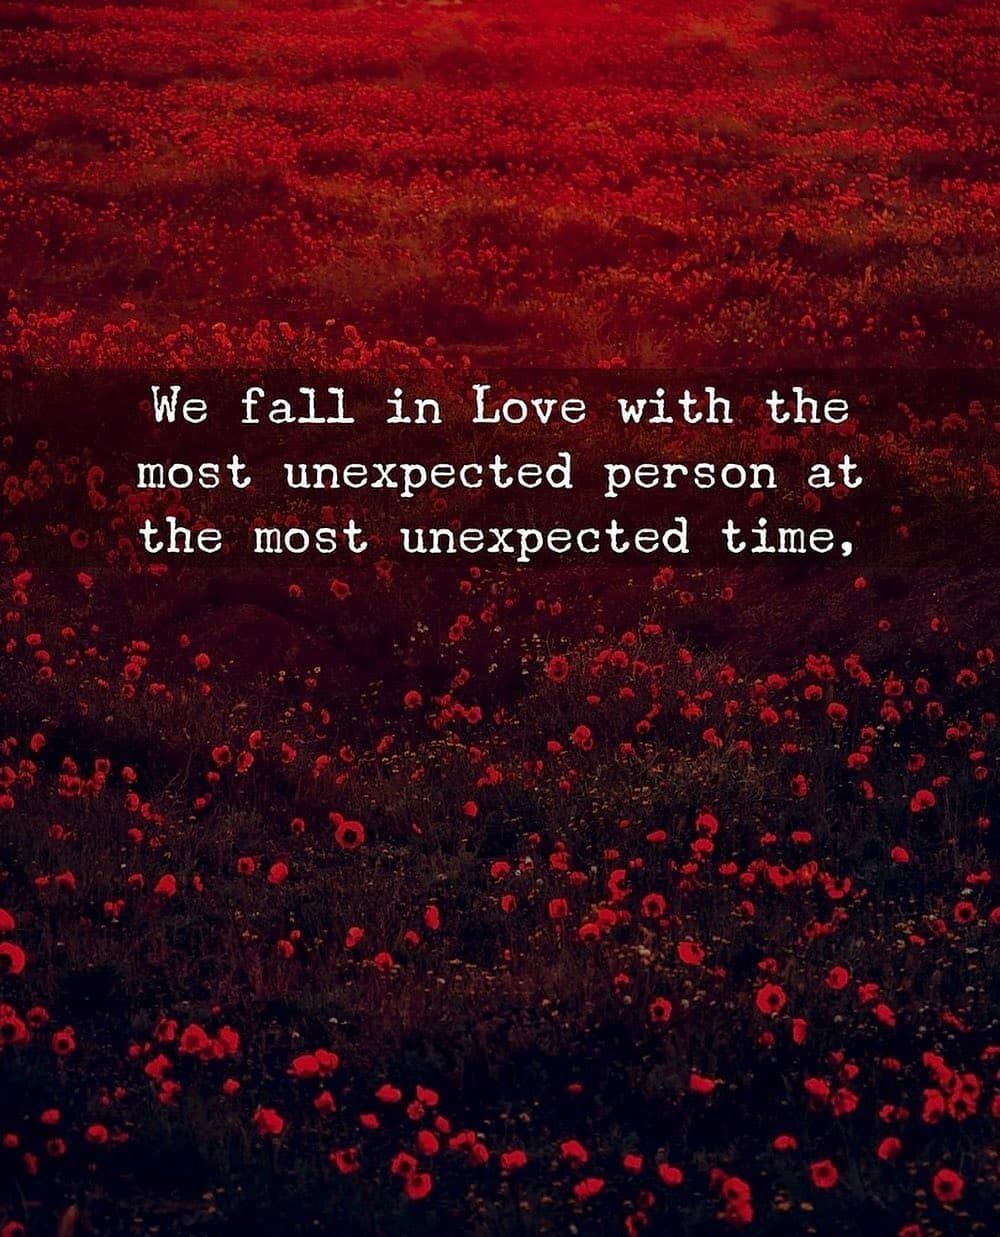 We fall in love with the most unexpected person at the most unexpected time